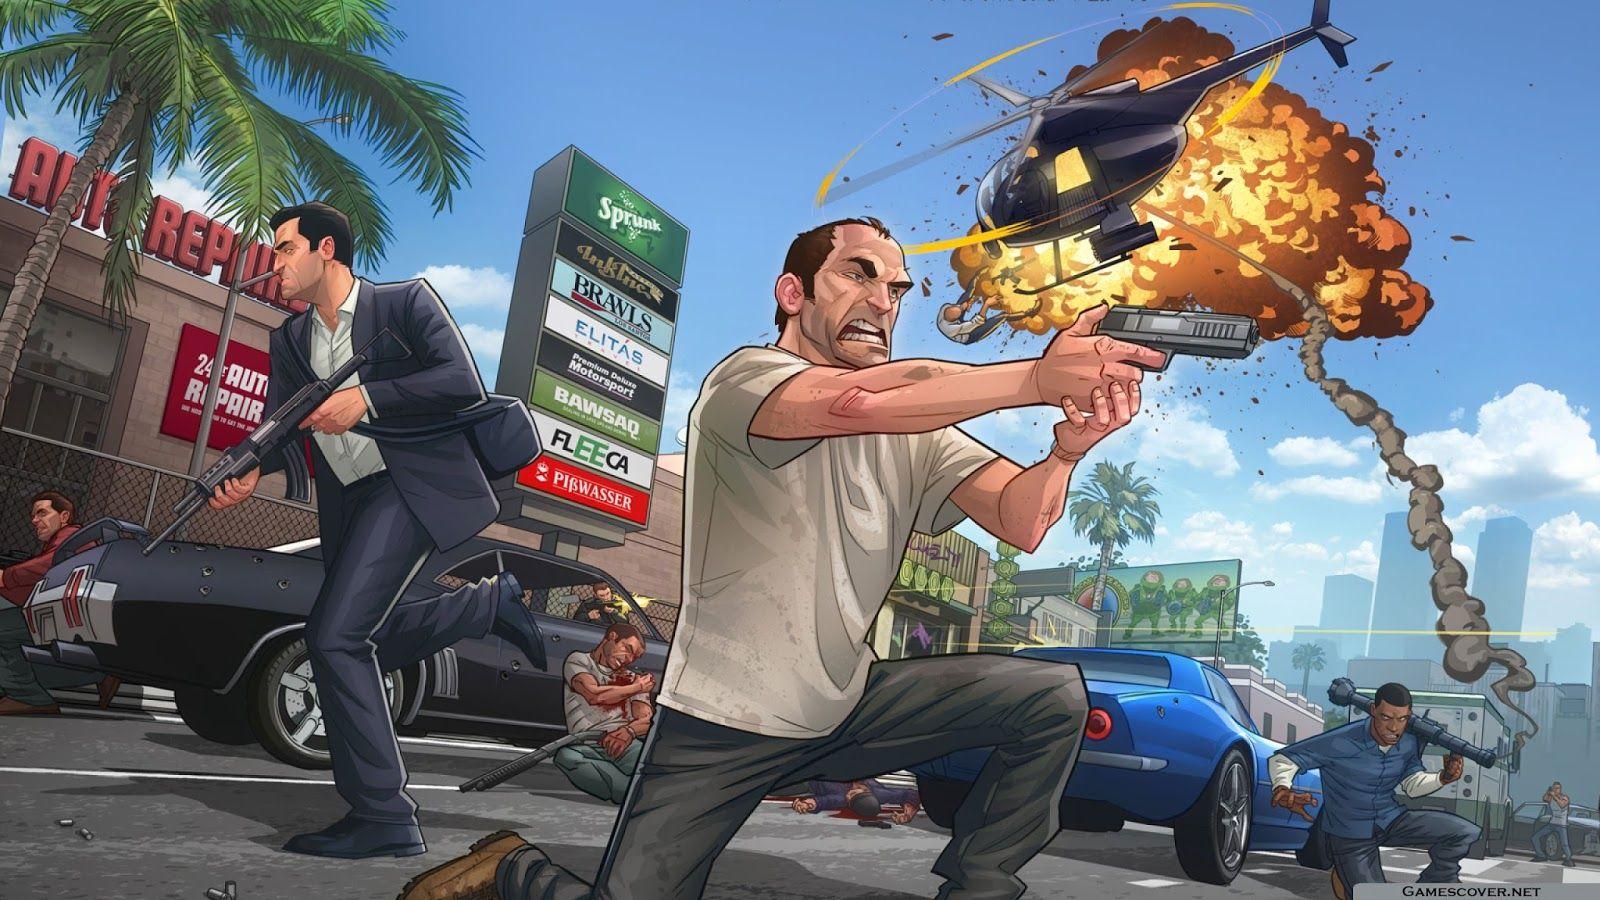 Grand Theft Auto V Wallpaper. Read games reviews, play online